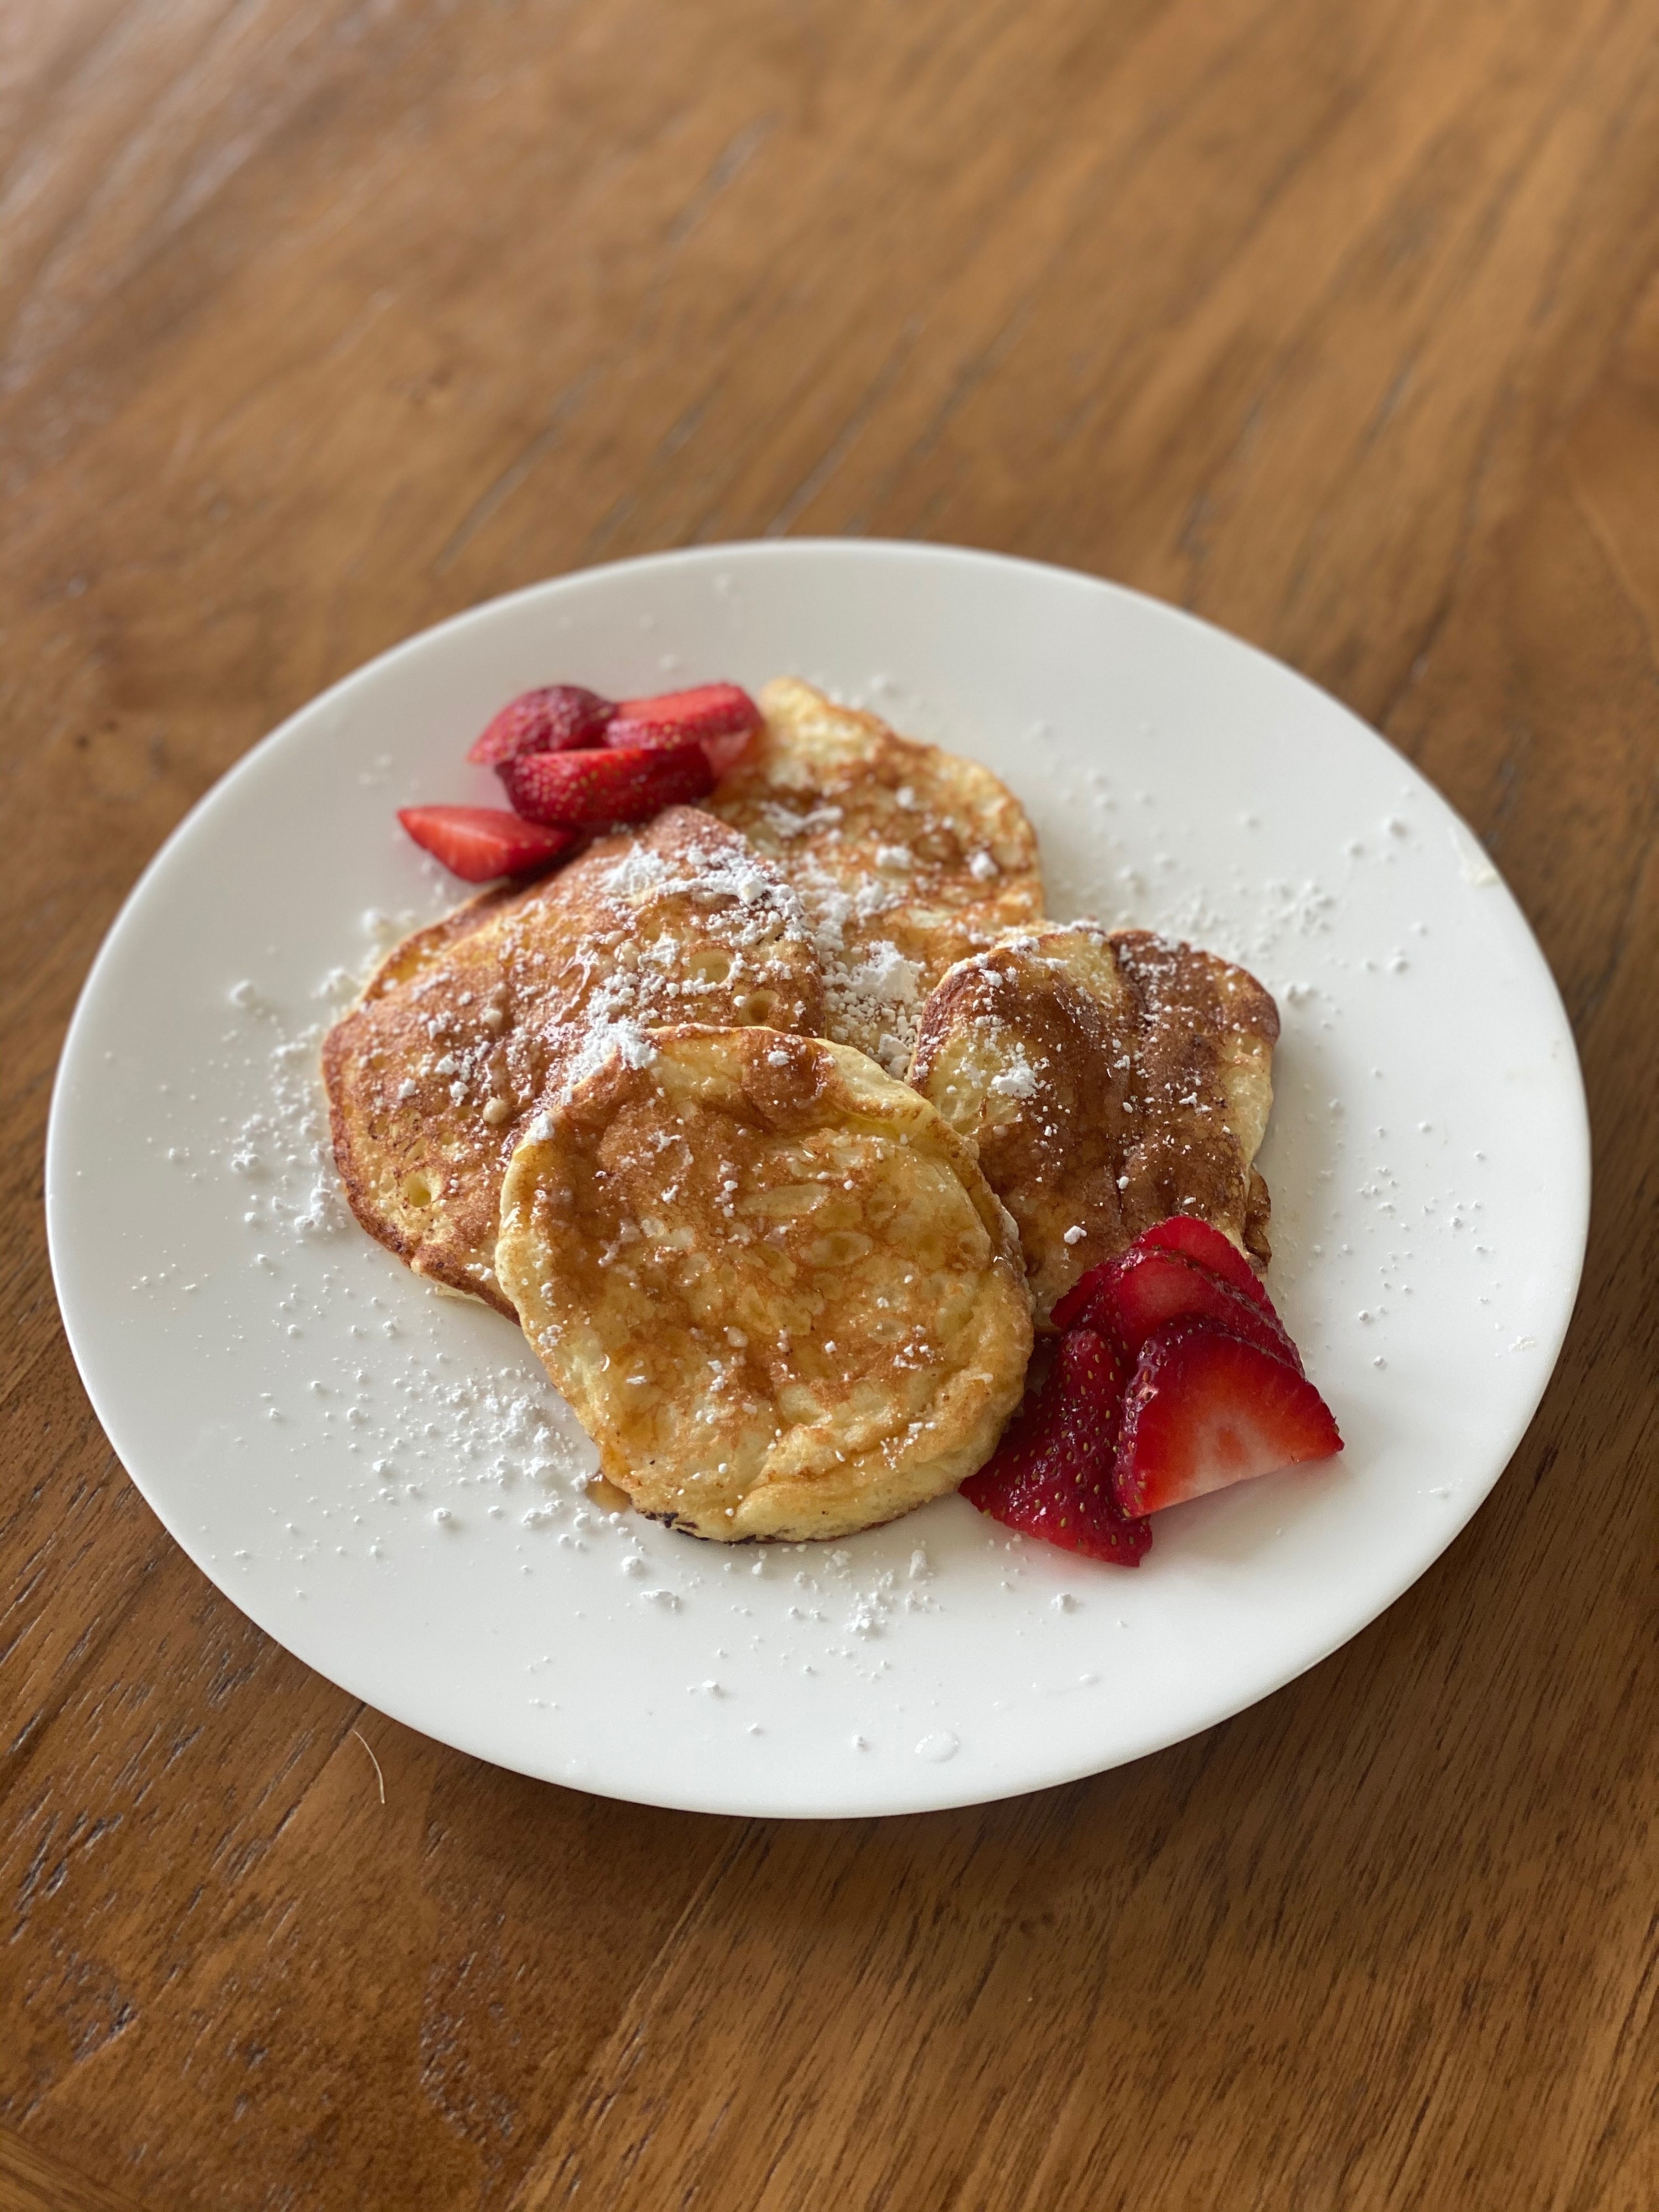 A plate of fluffy Japanese-style pancakes topped with powdered sugar, a drizzle of maple syrup, and sliced strawberries on the side.